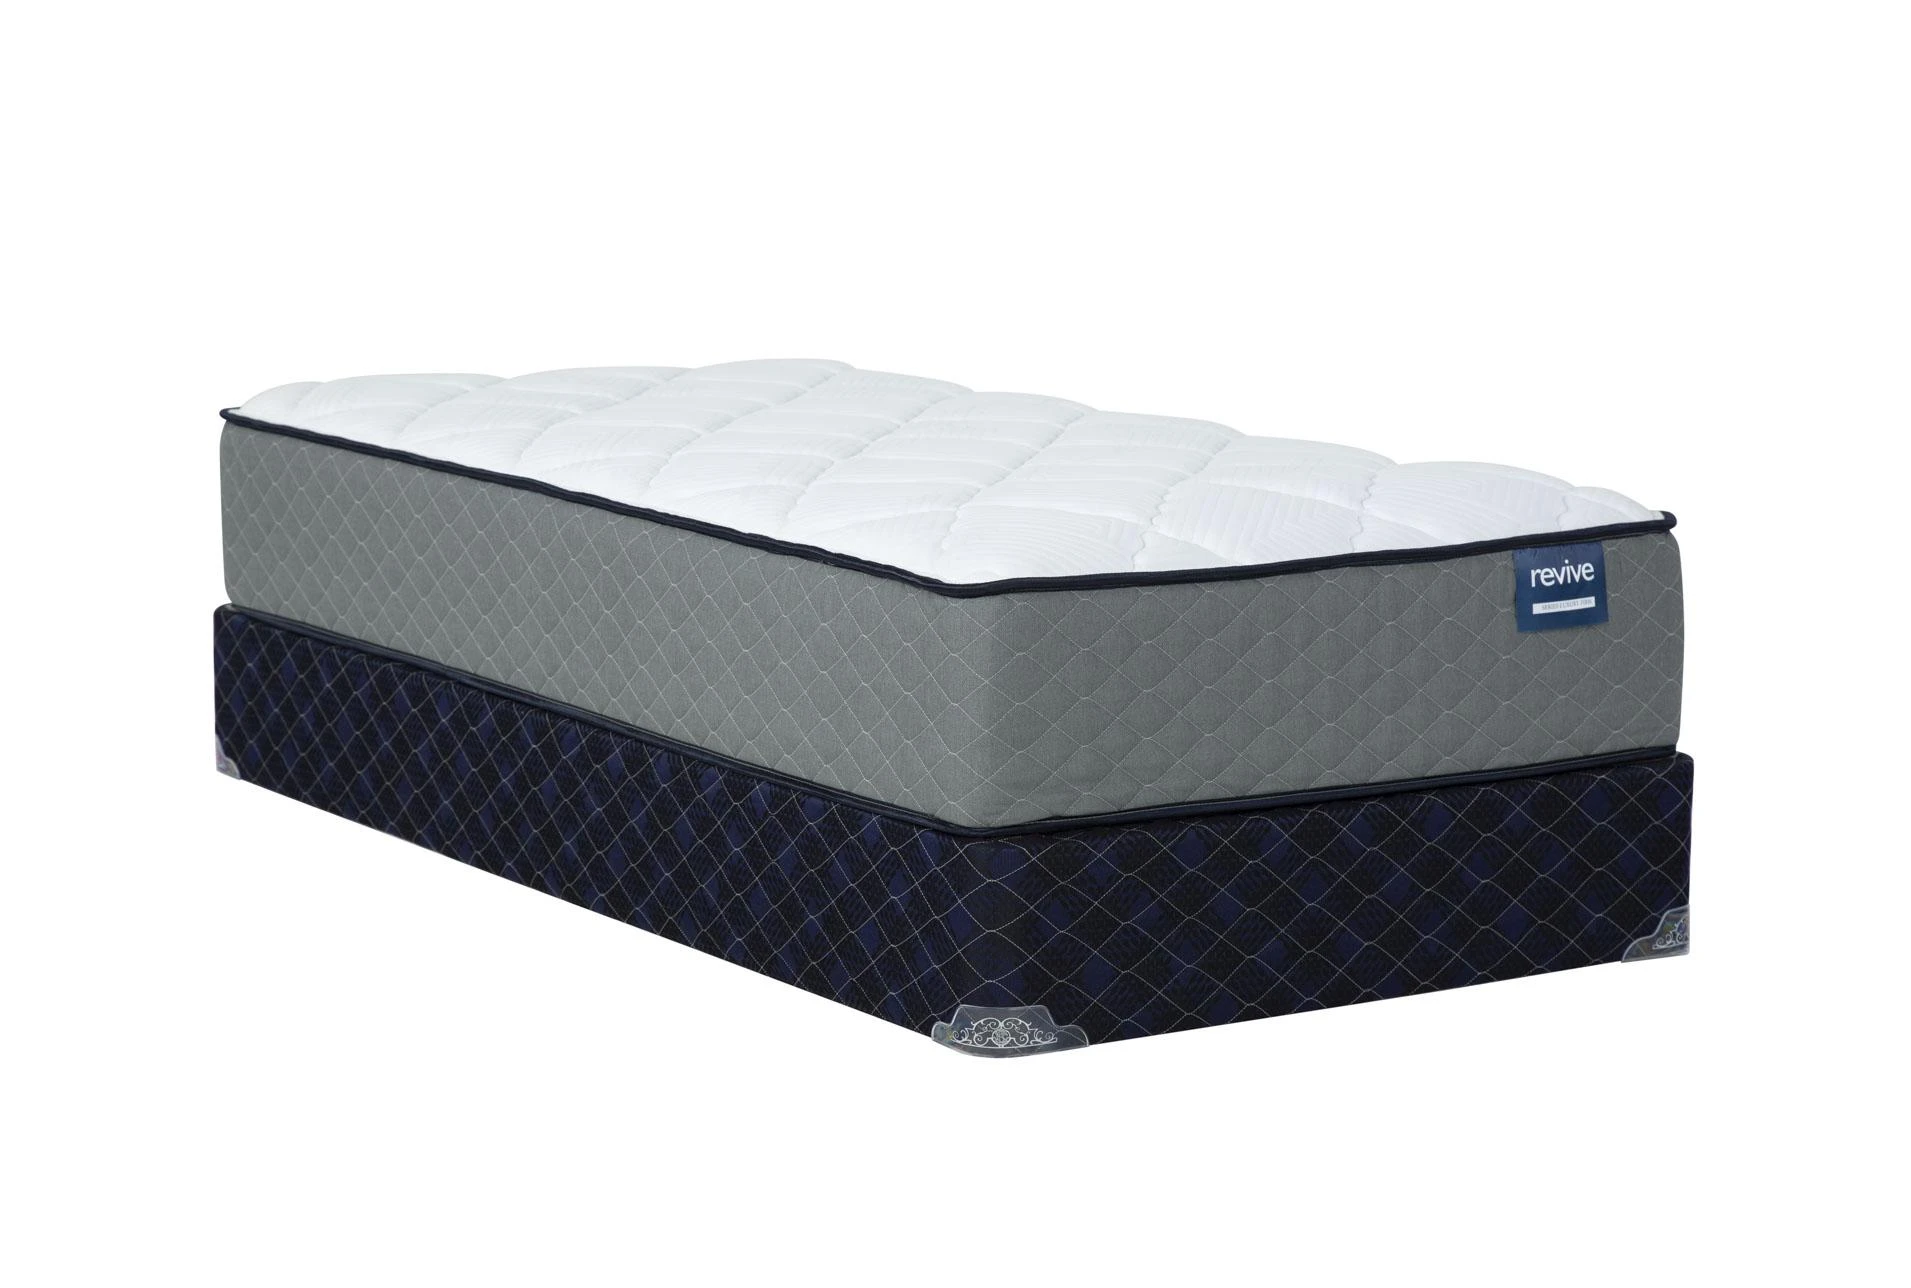 Best 96+ Awe-inspiring mattress firm twin size bed Trend Of The Year